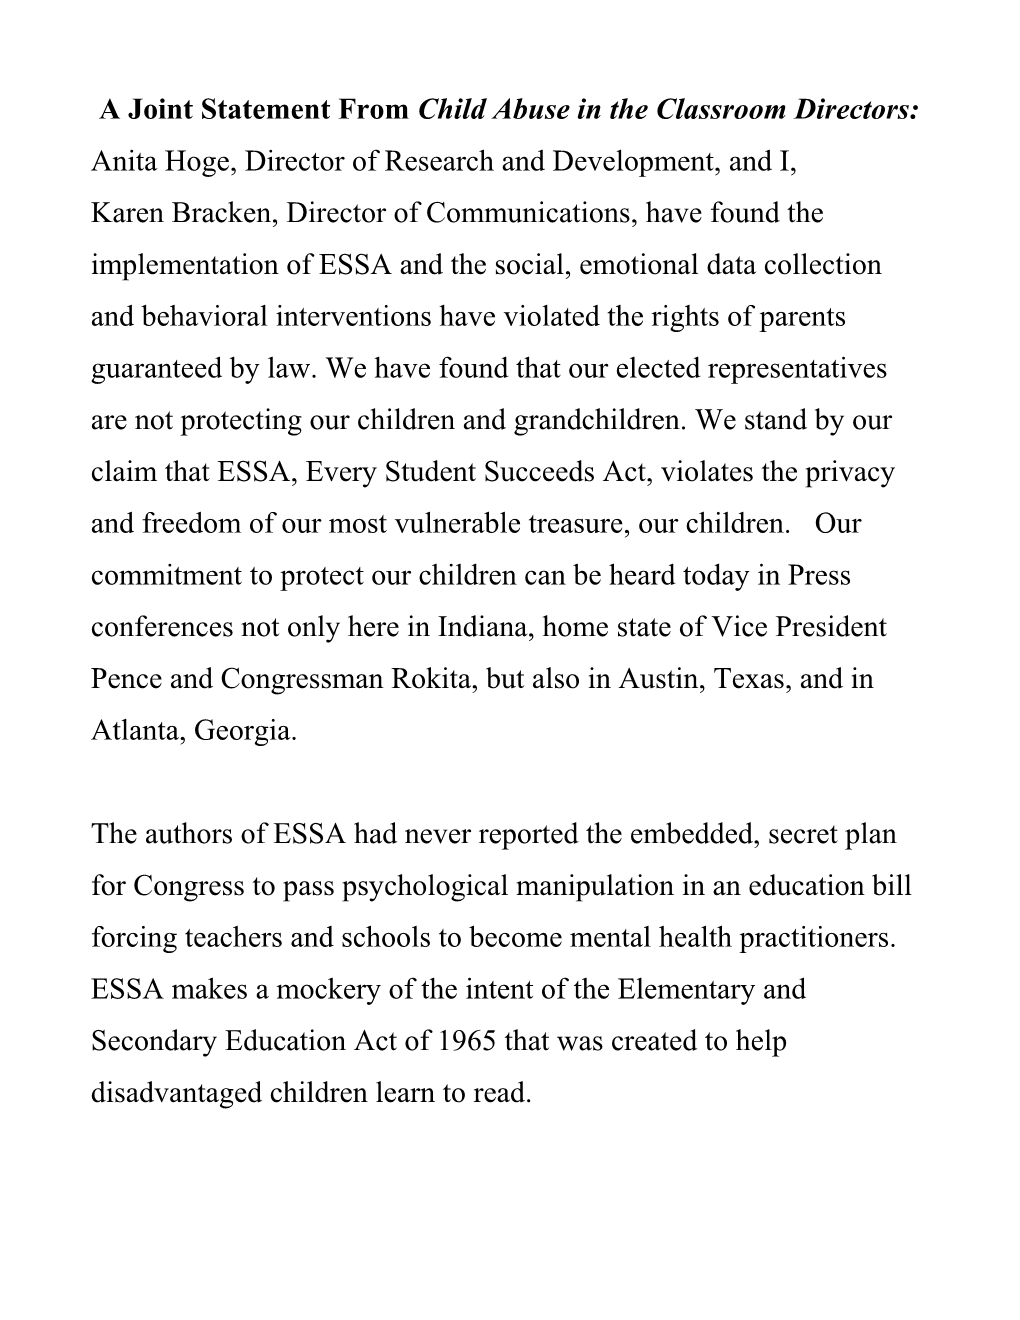 A Joint Statement from Child Abuse in the Classroom Directors